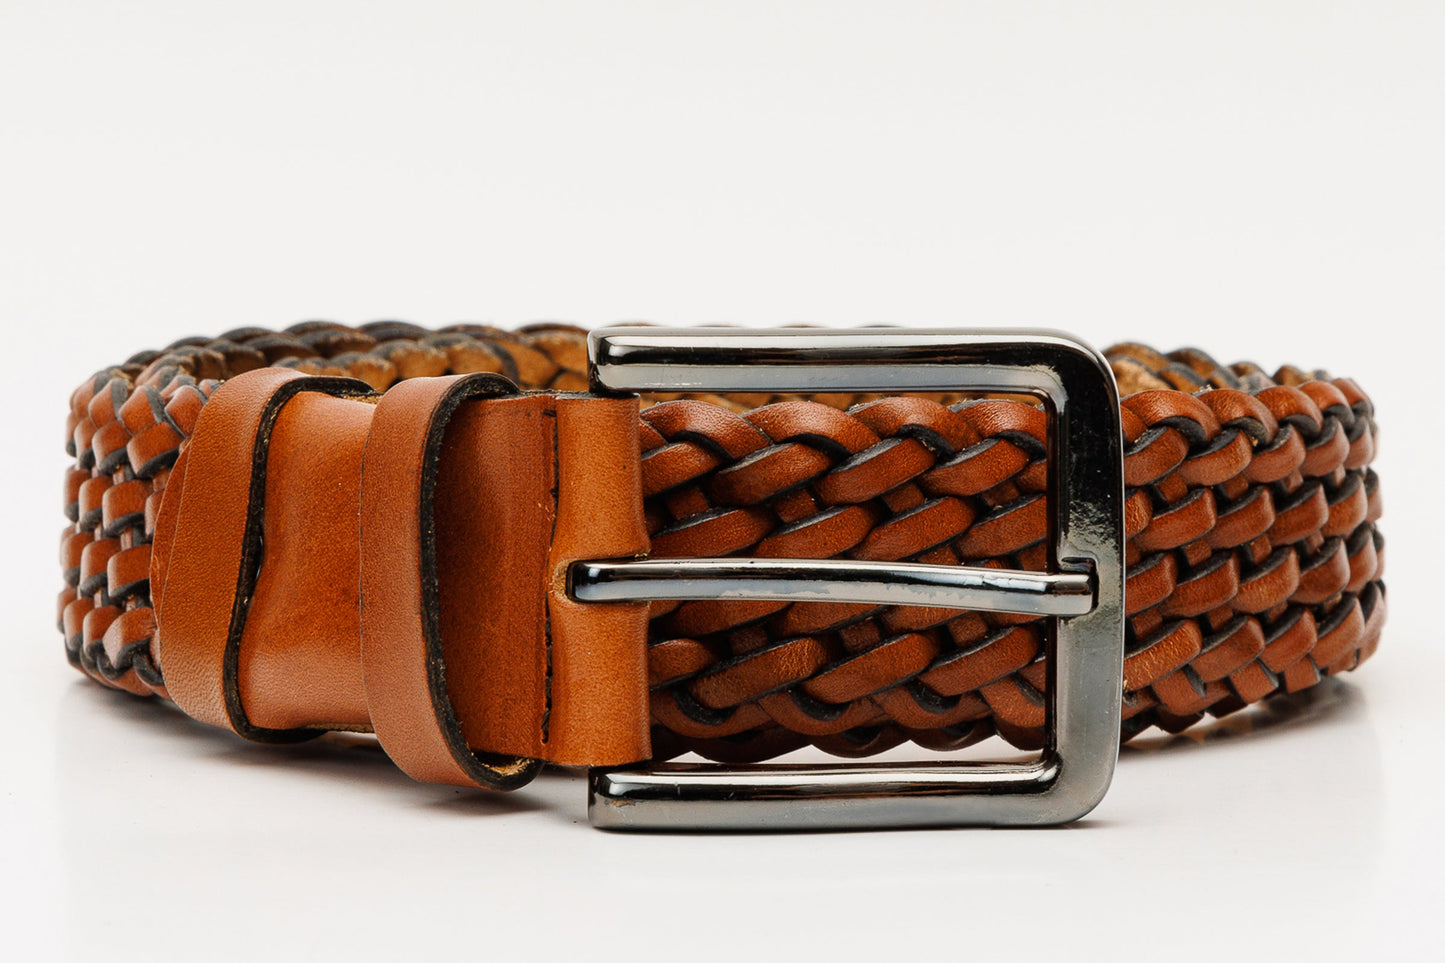 The Mclean Brown Leather Belt